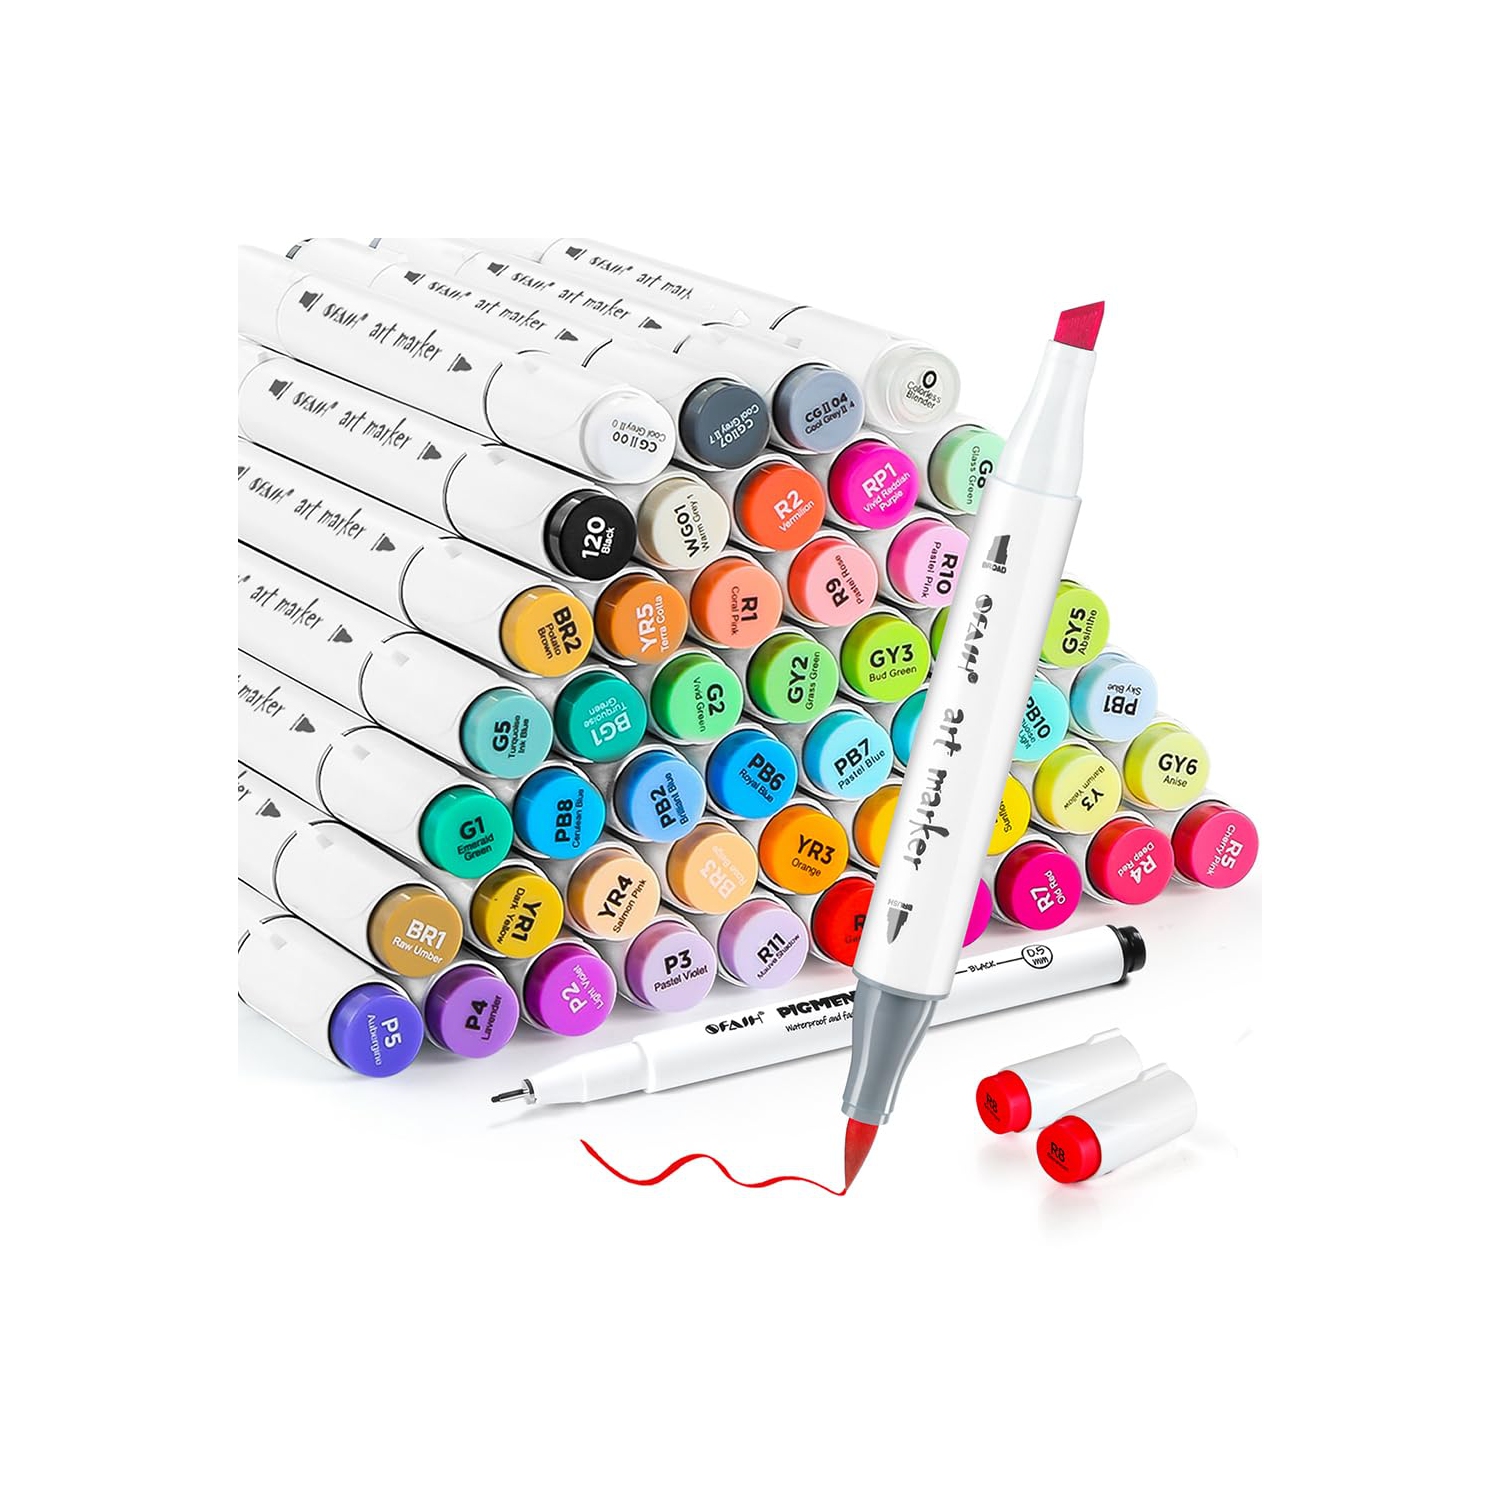 Colorful Creations Brush Tip Alcohol Markers - 49 Vibrant Dual Tip Art Markers for Coloring, Sketching, and Illustration